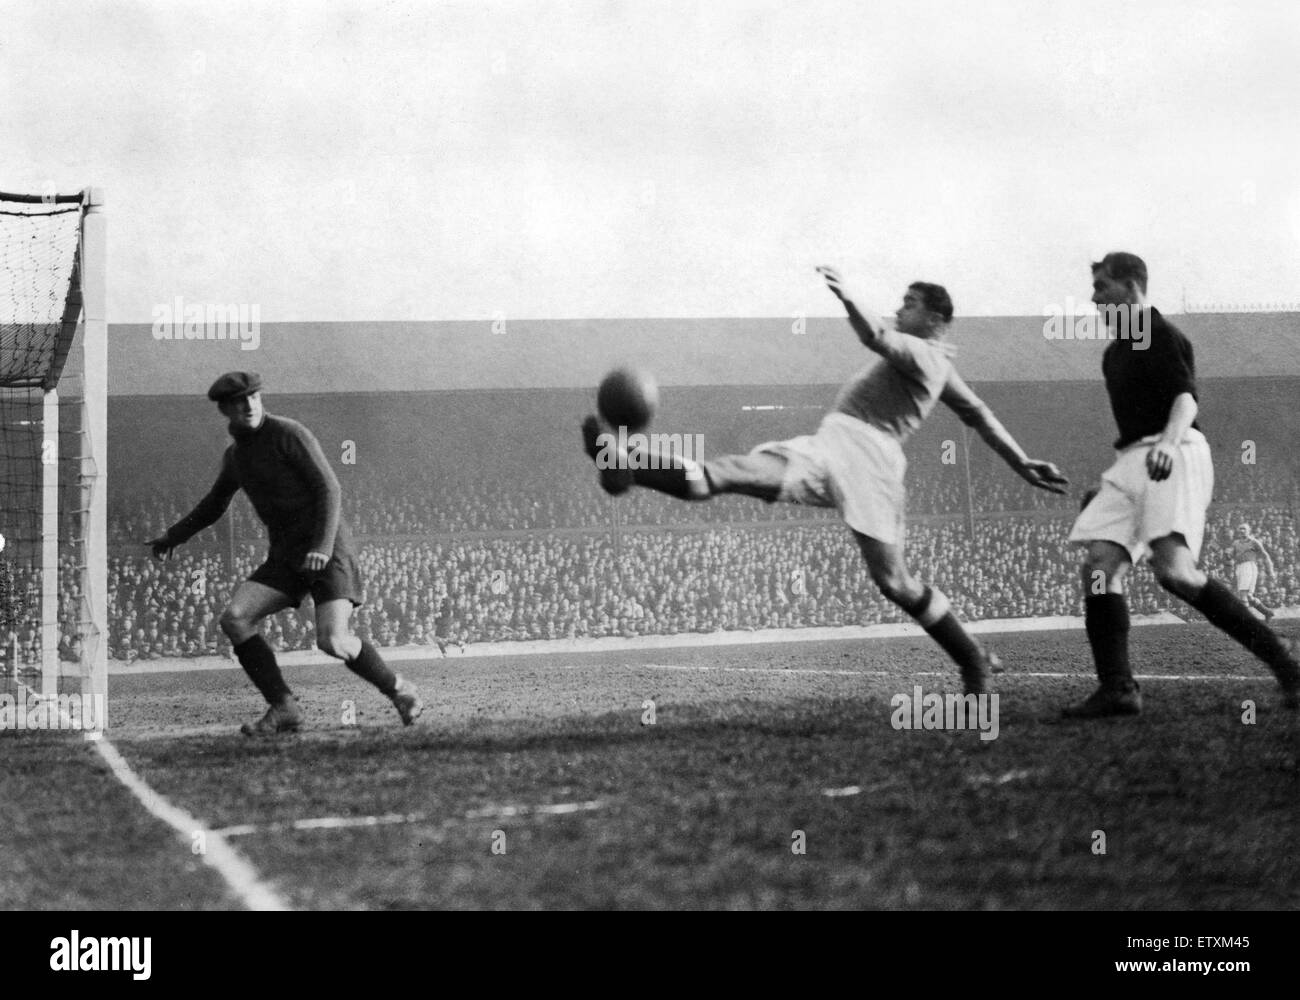 English League Division One match at Anfield. Liverpool 2 v Everton 1. Everton forward William 'Dixie' Dean attempts a shot on goal watched by Liverpool goalkeeper Stan Kane and full back Jack Tennant during the Merseyside derby. 20th March 1935. Stock Photo